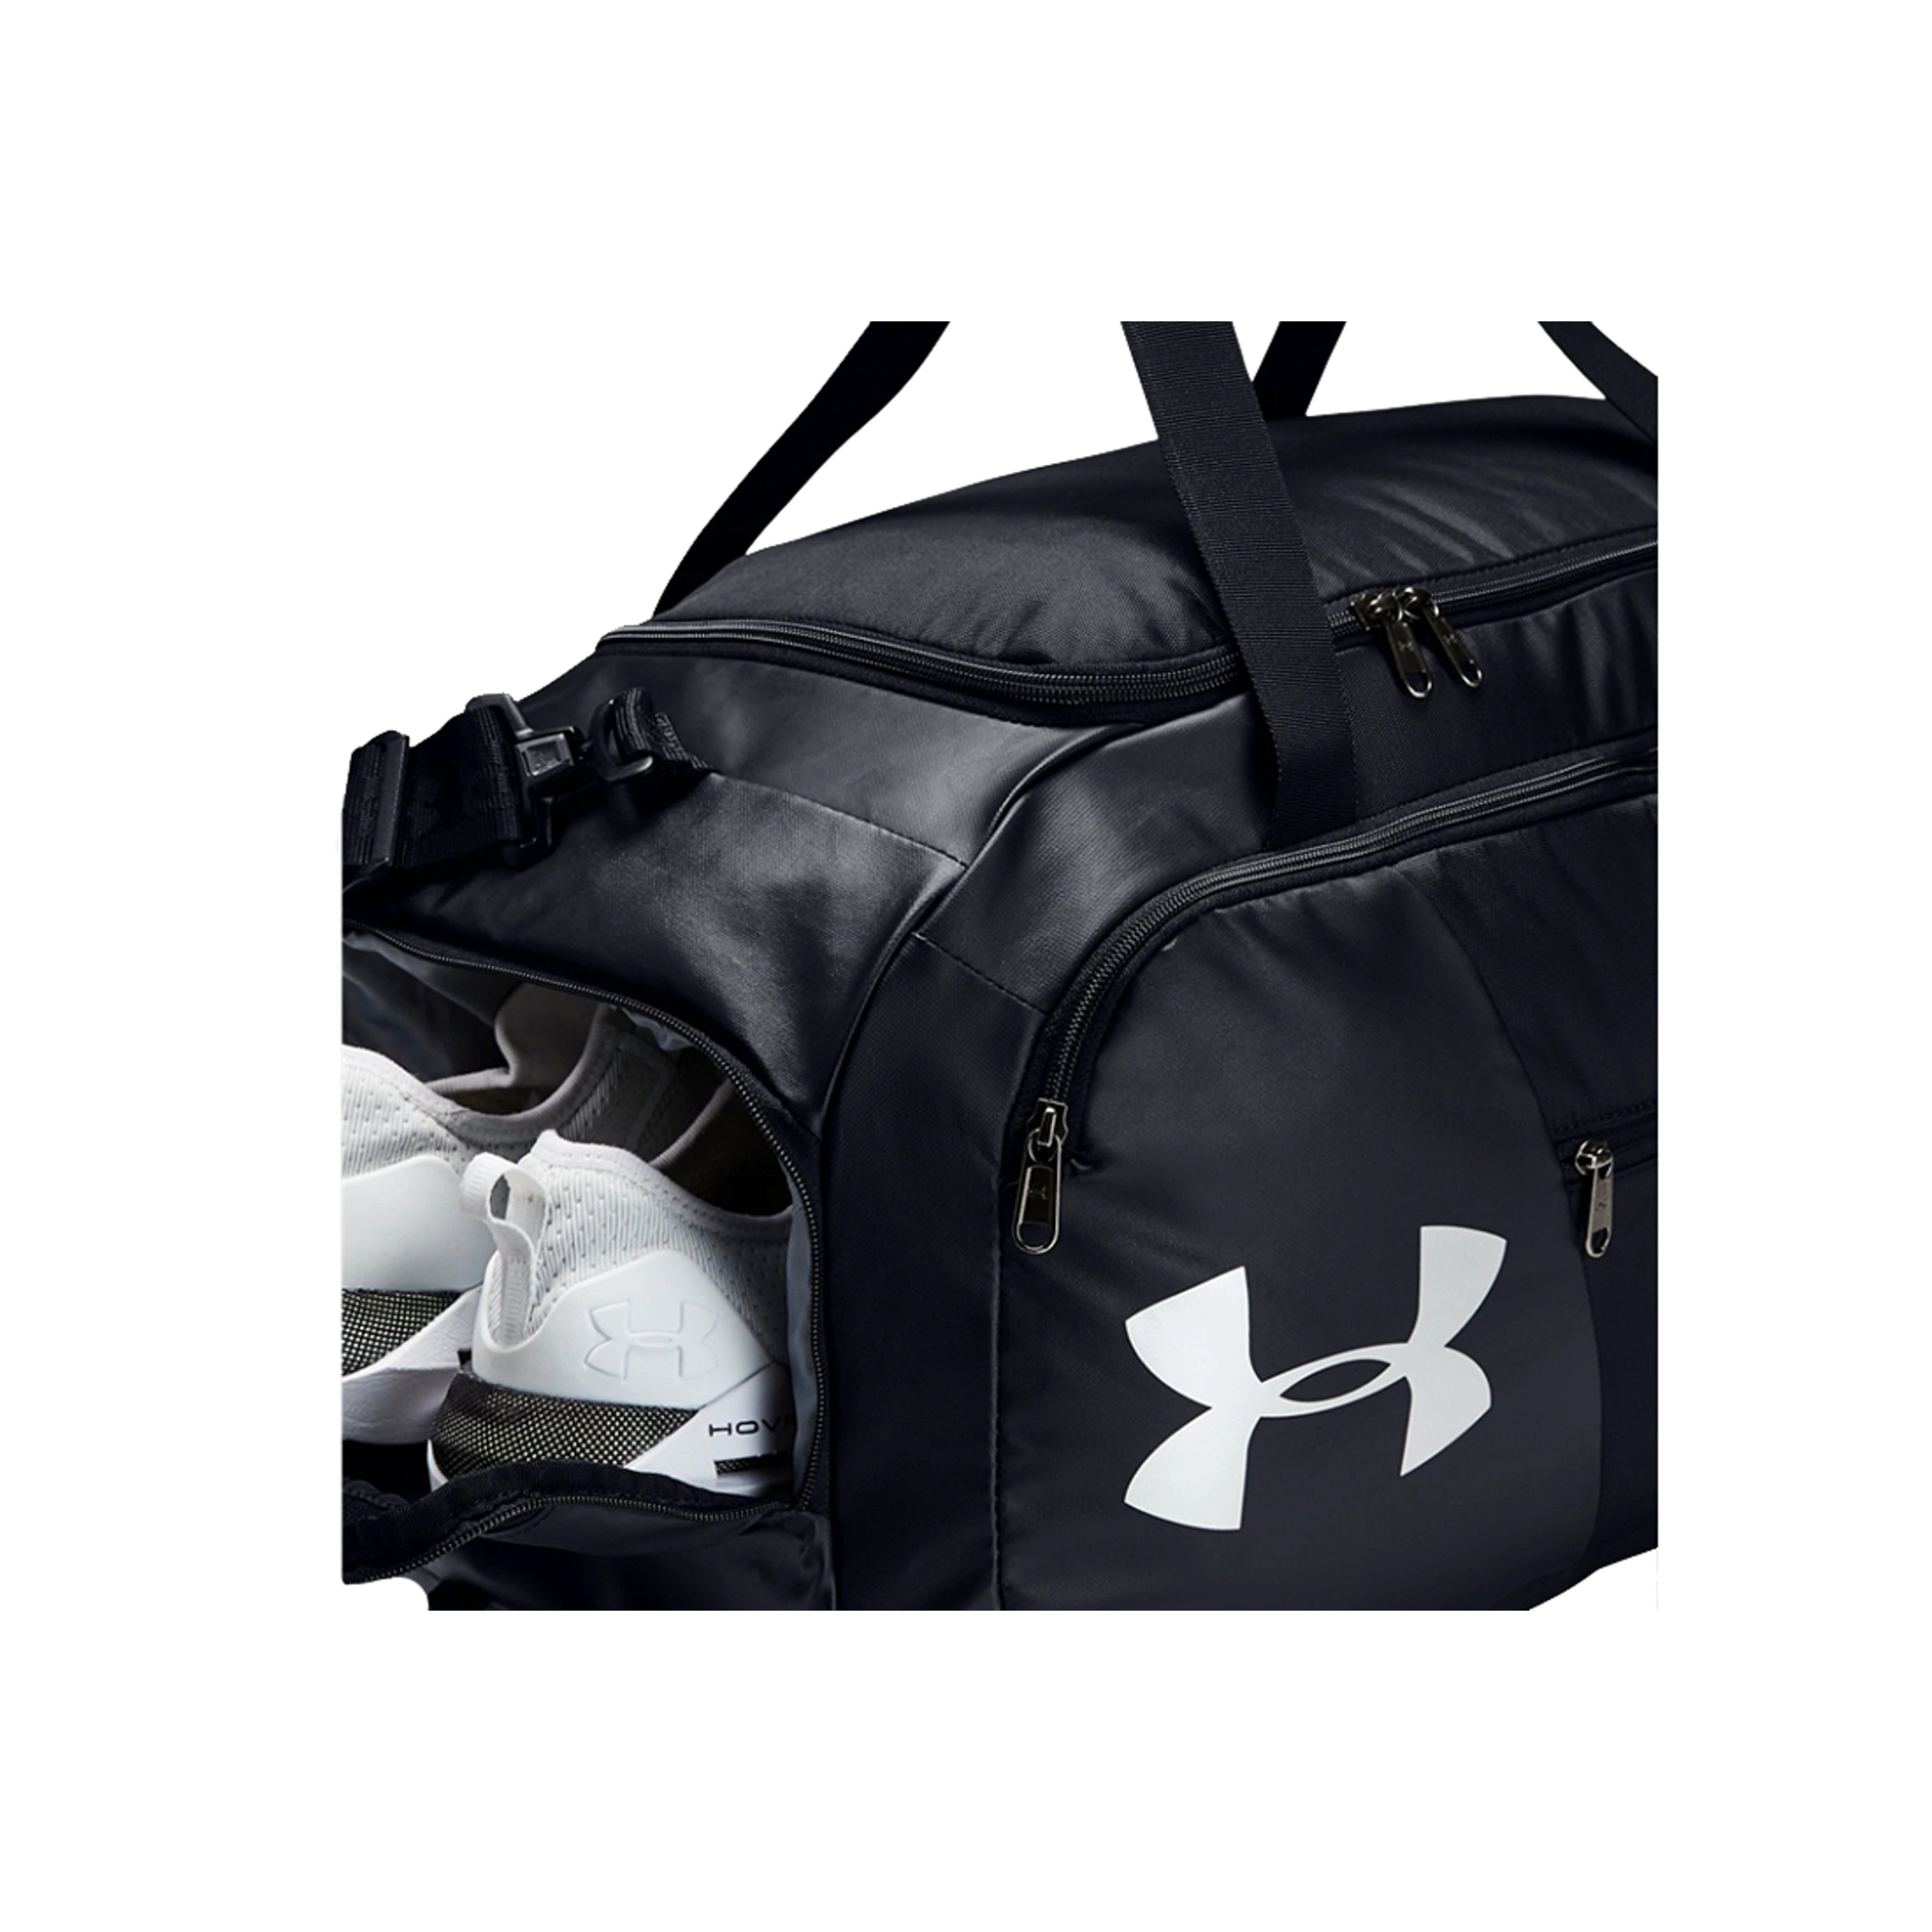 Under Armour Undeniable Duffel 4.0 Md 1342657-001